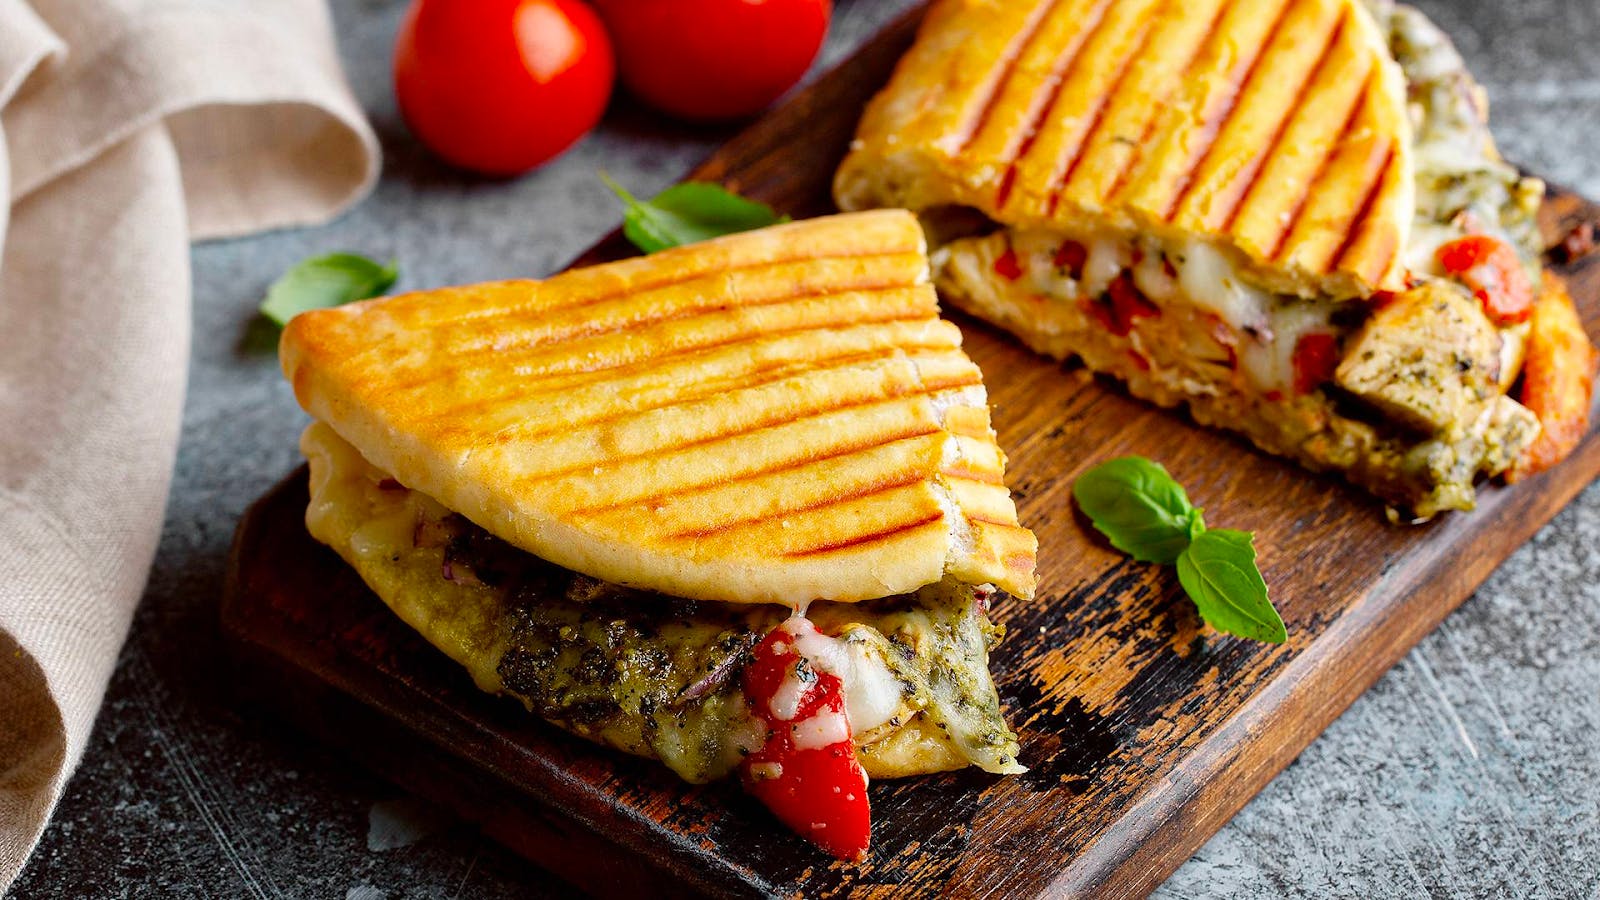 Some food from the Panini Grill restaurant.